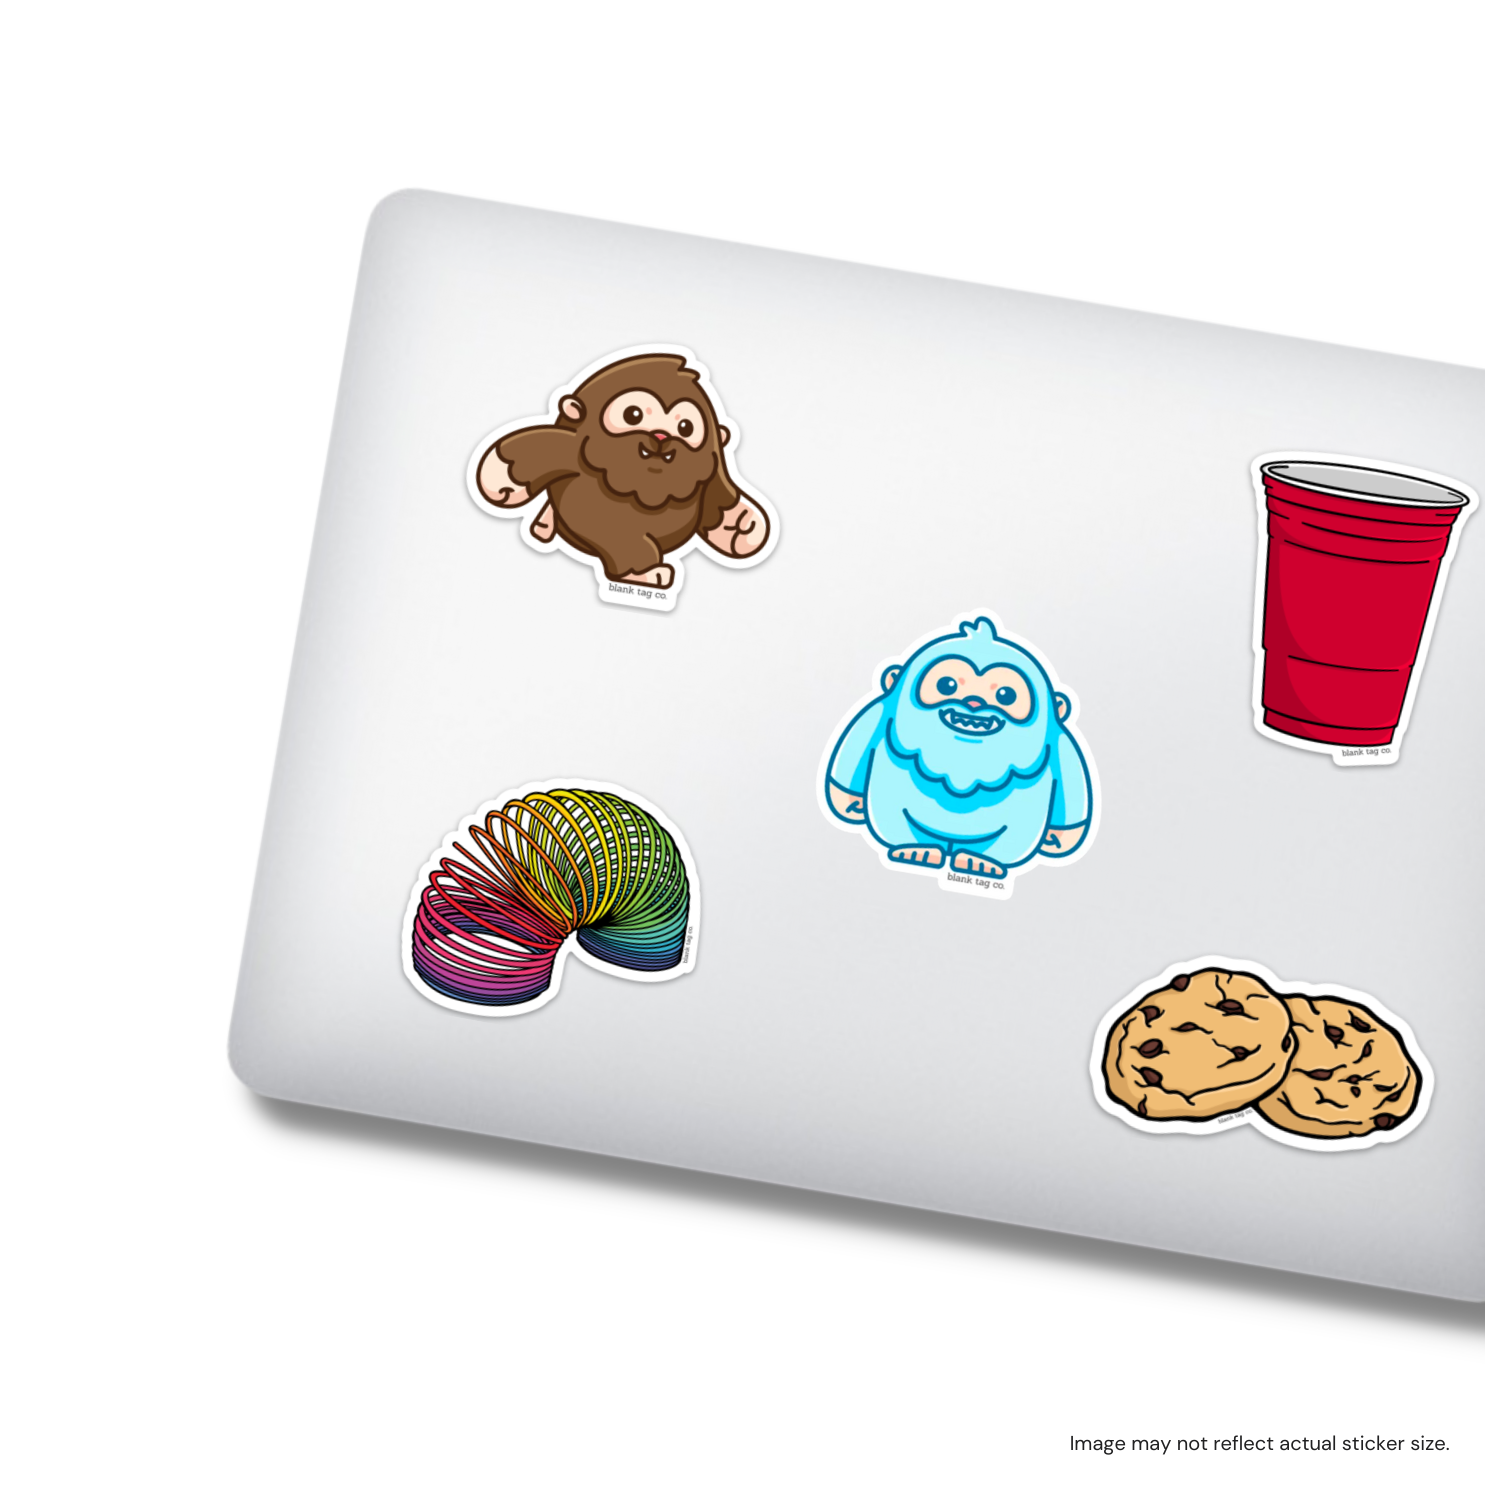 The Chocolate Chip Cookies Sticker